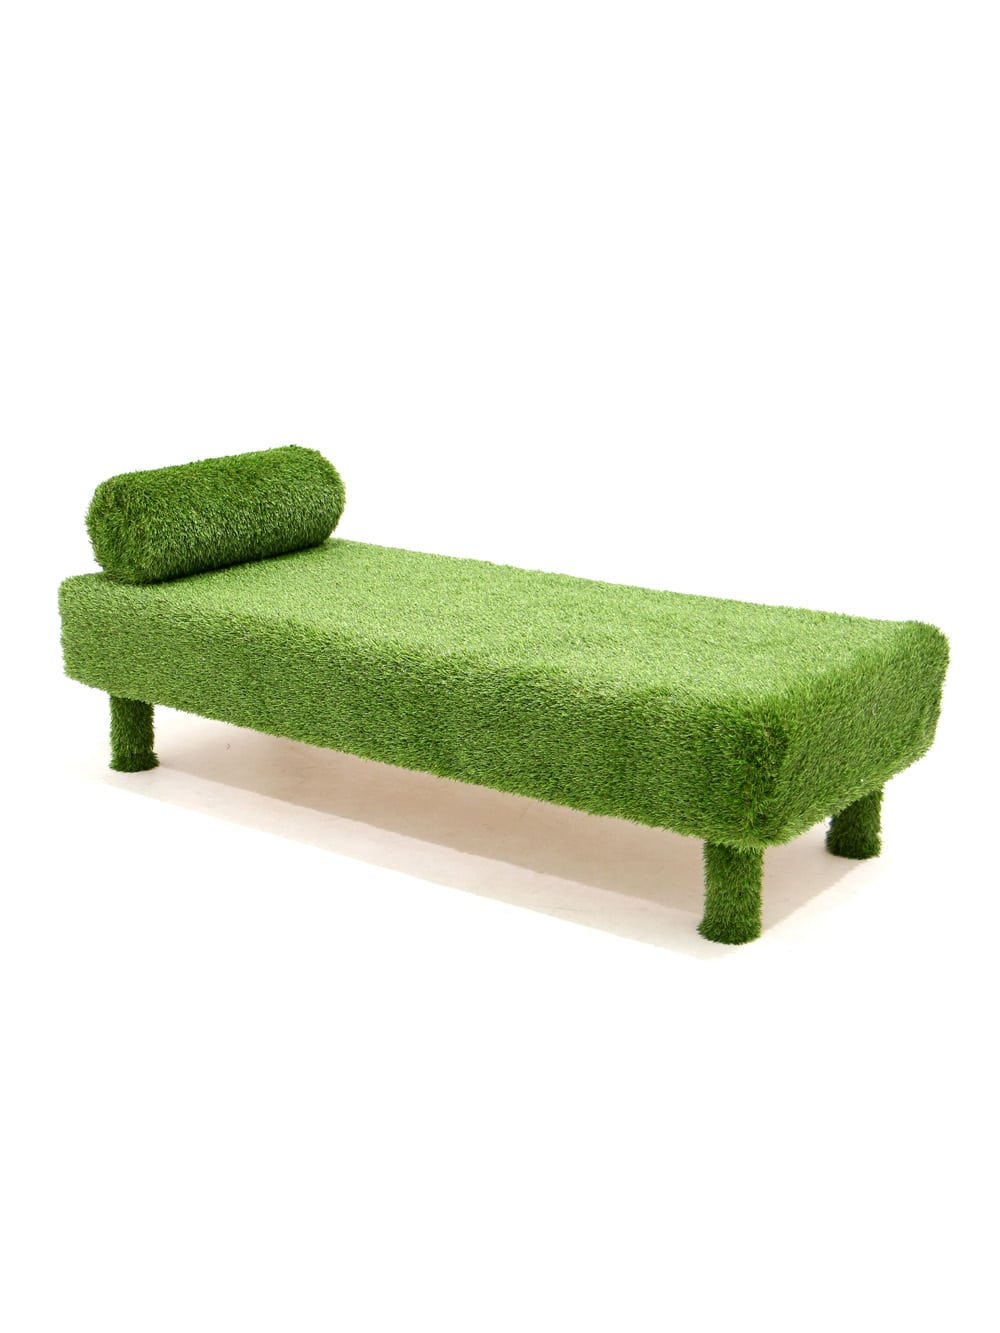 Grass Covered Day Bed